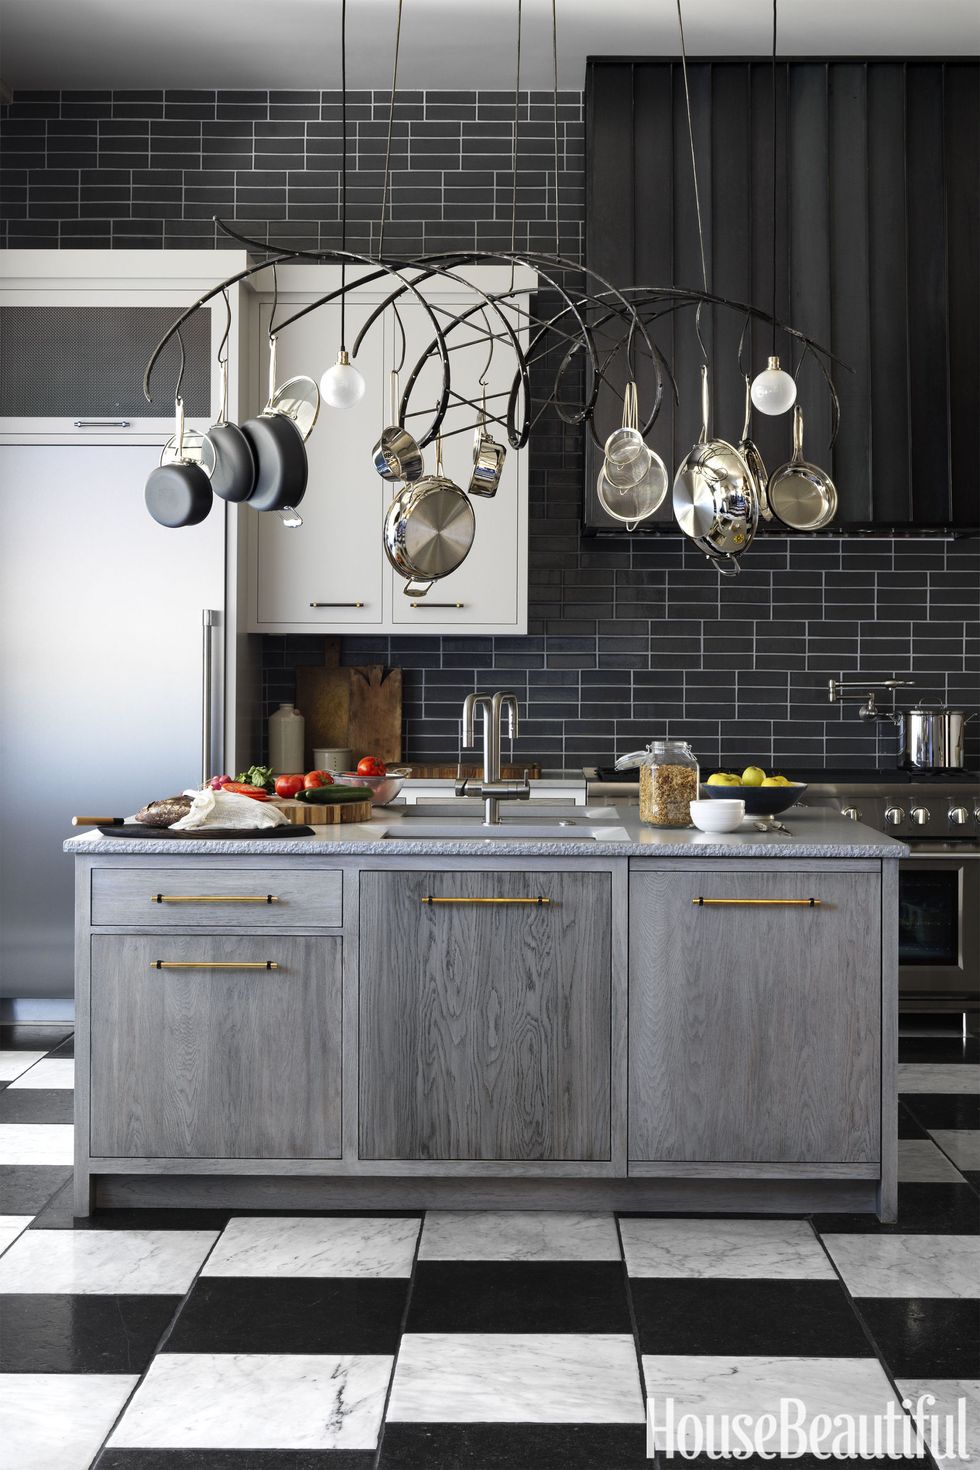 Kitchens of the Year - Designer Tips from House Beautiful's